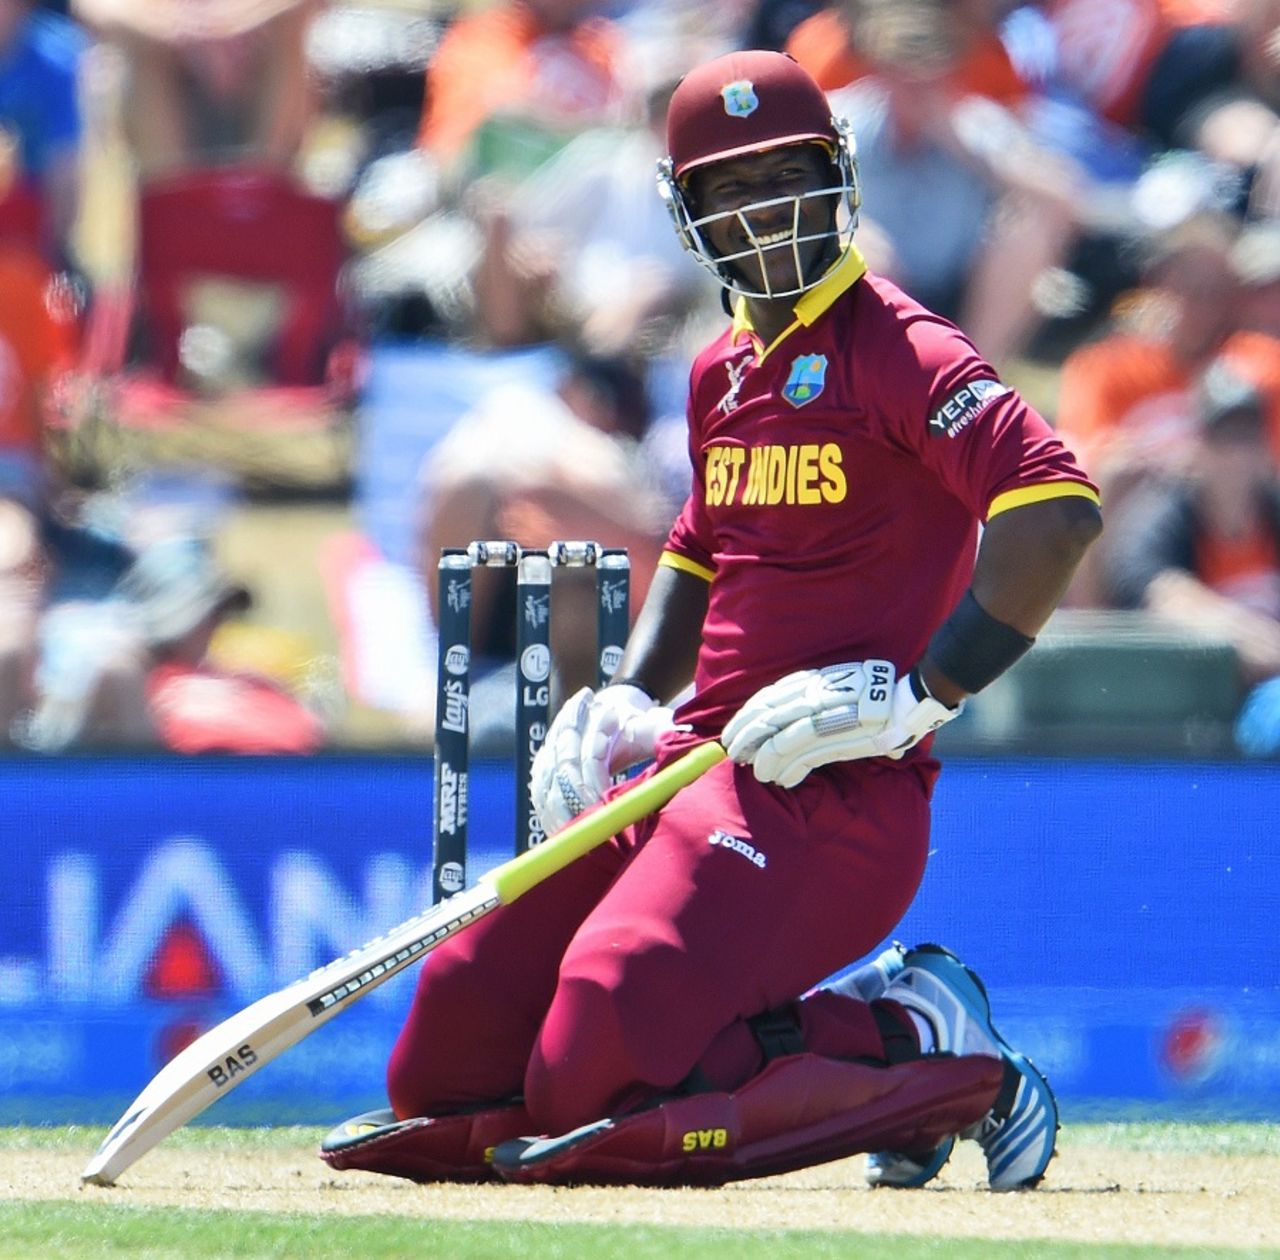 Darren Sammy sports a wry smile after evading a bouncer, Pakistan v West Indies, World Cup 2015, Group B, Christchurch, February 21, 2015